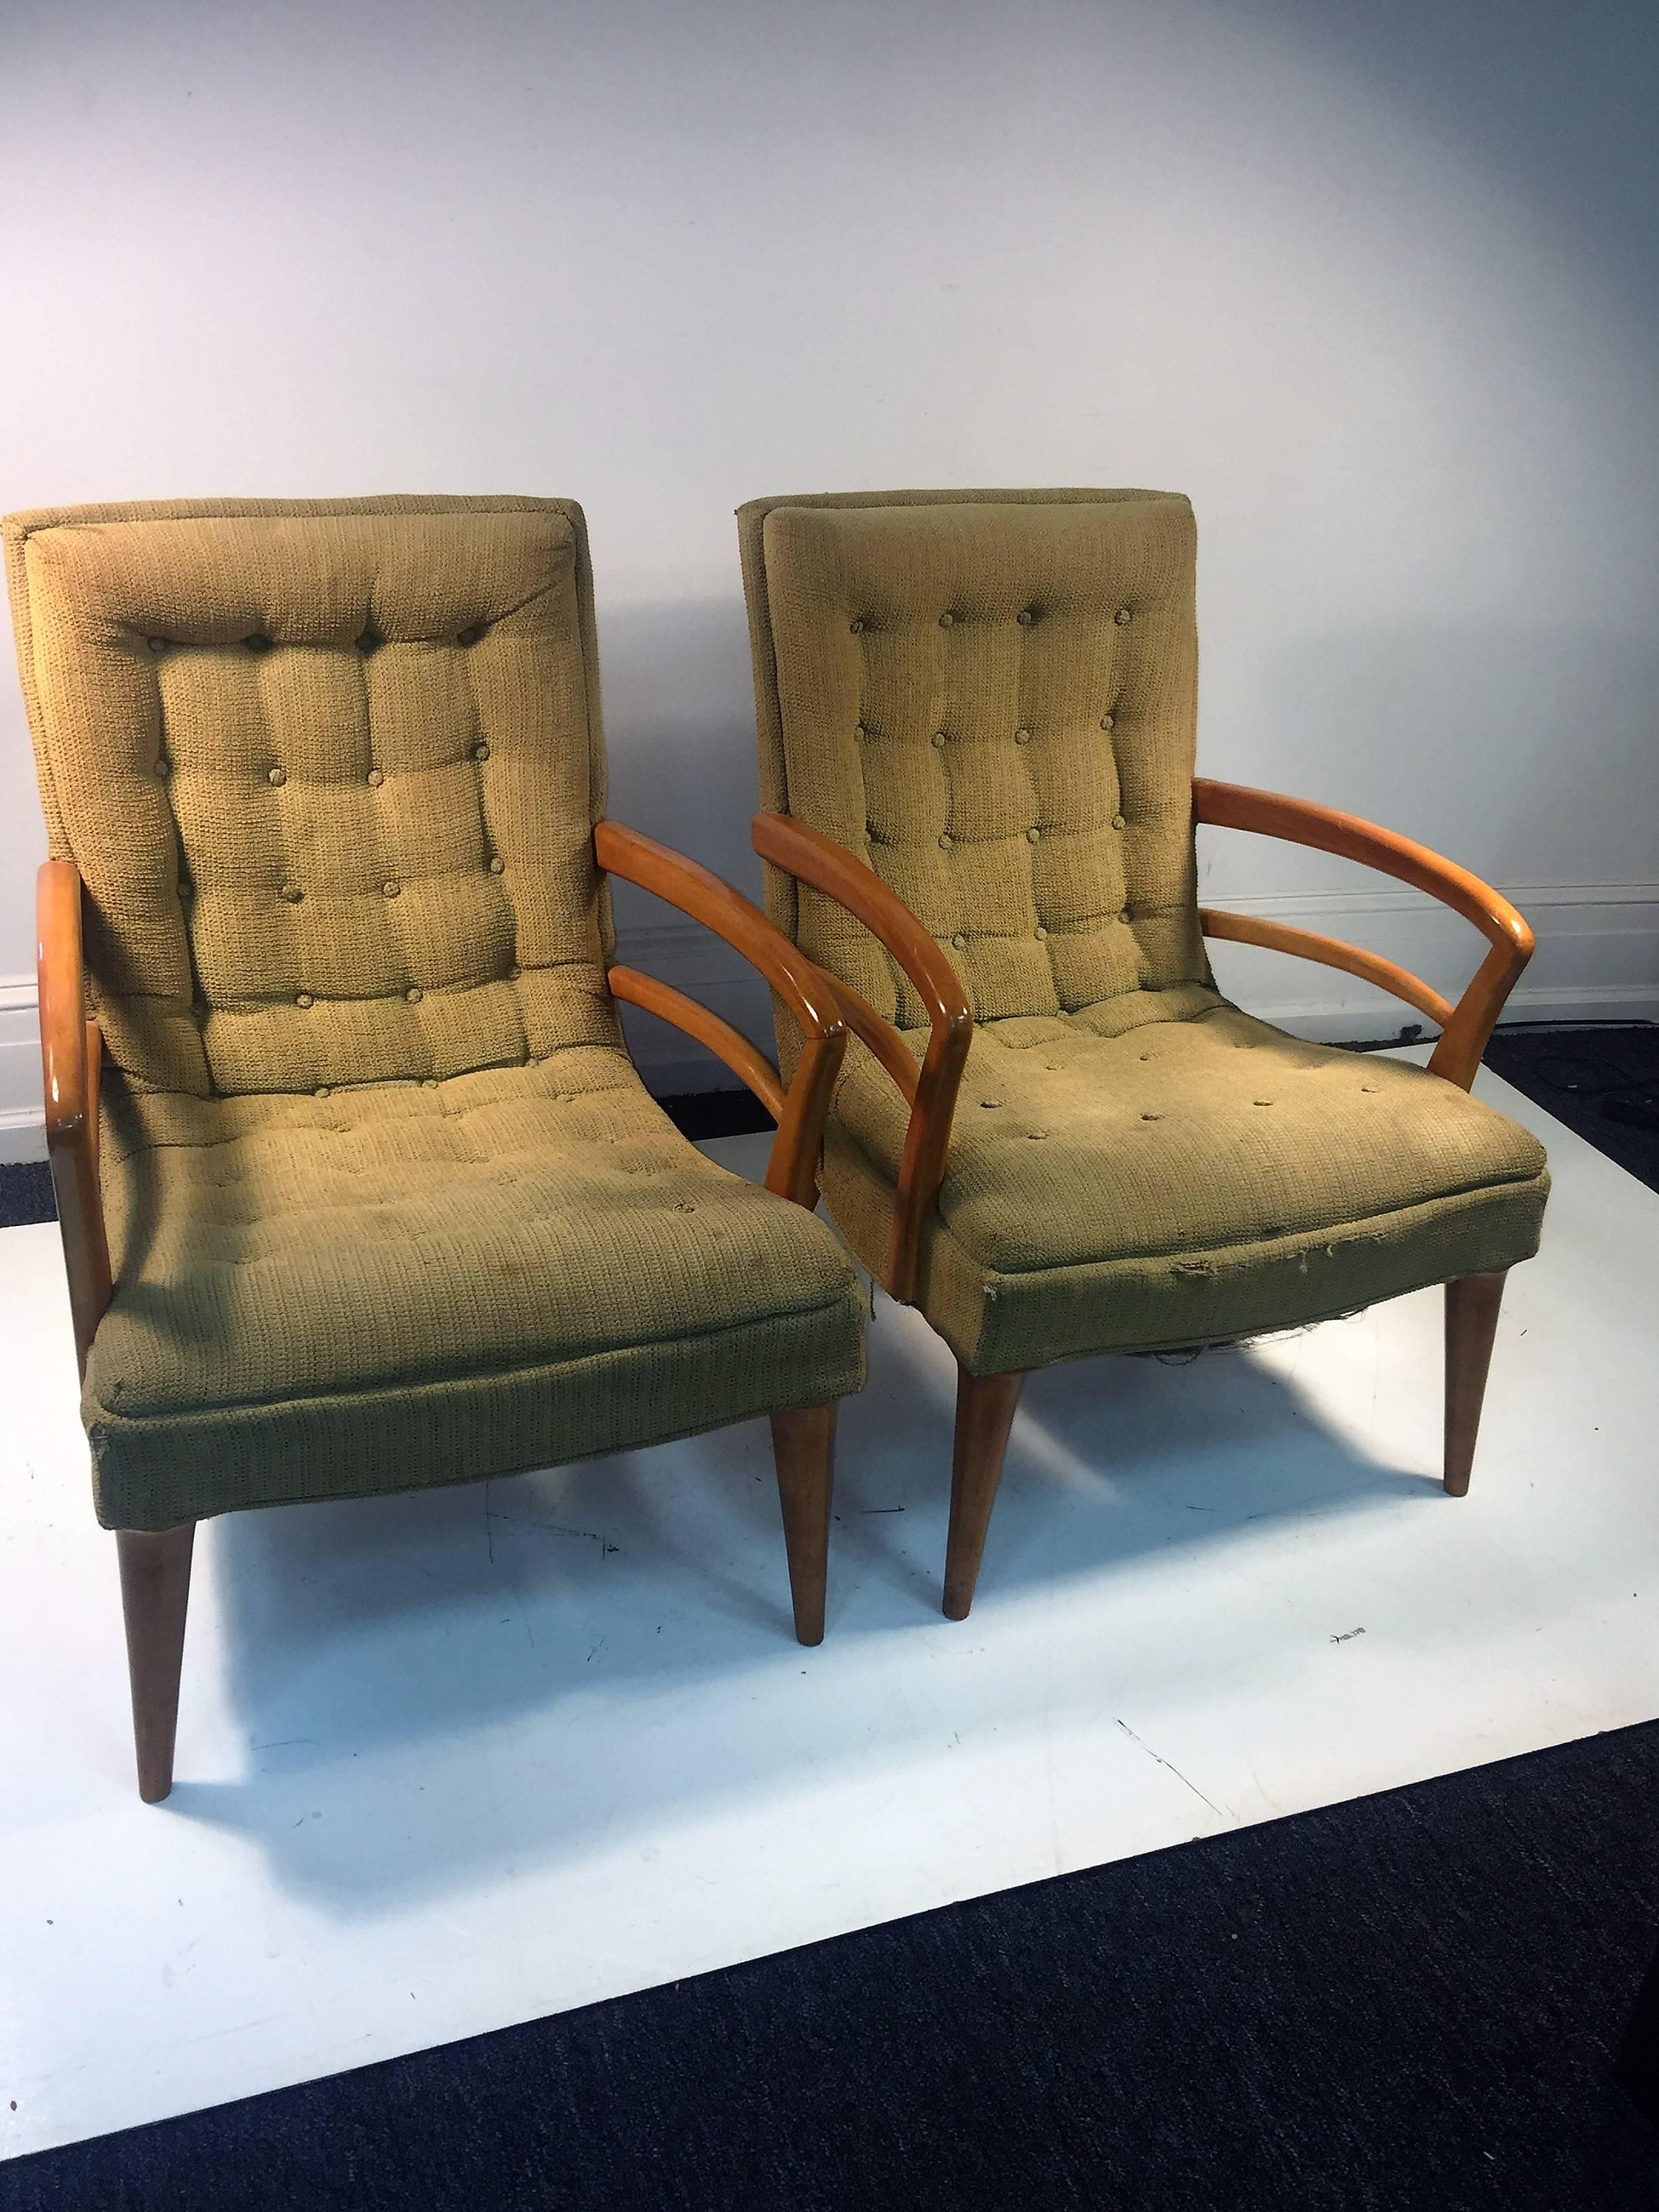 Pair of armchairs designed by Kem Weber circa 1940s with original upholstery.
Wonderful tufted design that can be reupholstered in a great fabric. These chairs would suit many interiors be it Art Deco or Mid-Century. Great double handled bentwood